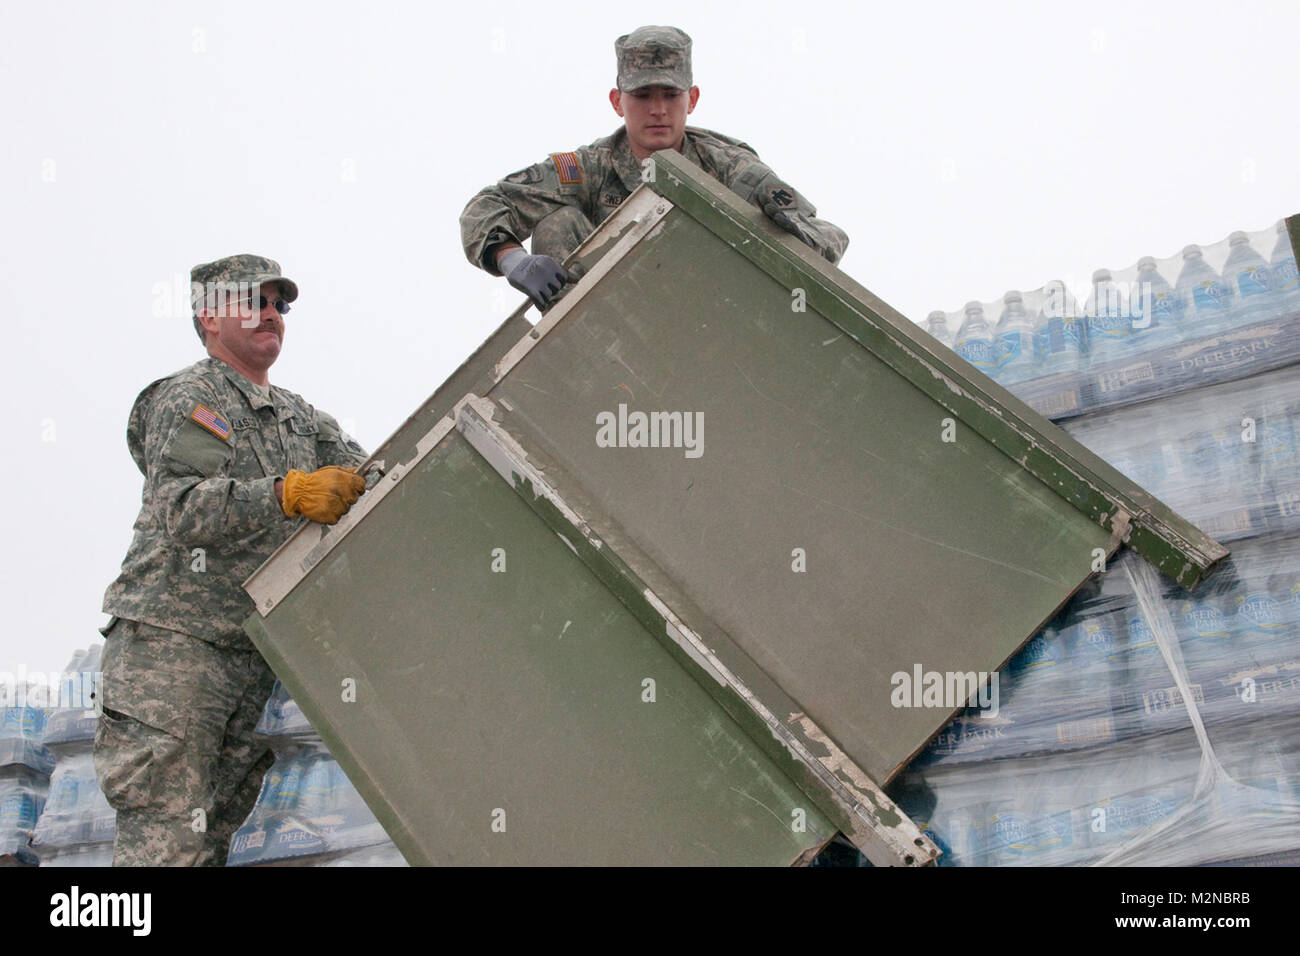 Members of the Oklahoma Army National Guard were called to state active duty in support of Operation Frosty, a relief effort for areas hit hardest by an ice storm on Jan 28 and 29, 2010. Spc. Michael Velasco of Midwest City & Deming, N.M (left) and Sgt. Cody Swearingen of Midwest City remove side panels from their vehicle in order to off-load pallets of water at the Anadarko Fire Department. Anadarko Resupply by Oklahoma National Guard Stock Photo